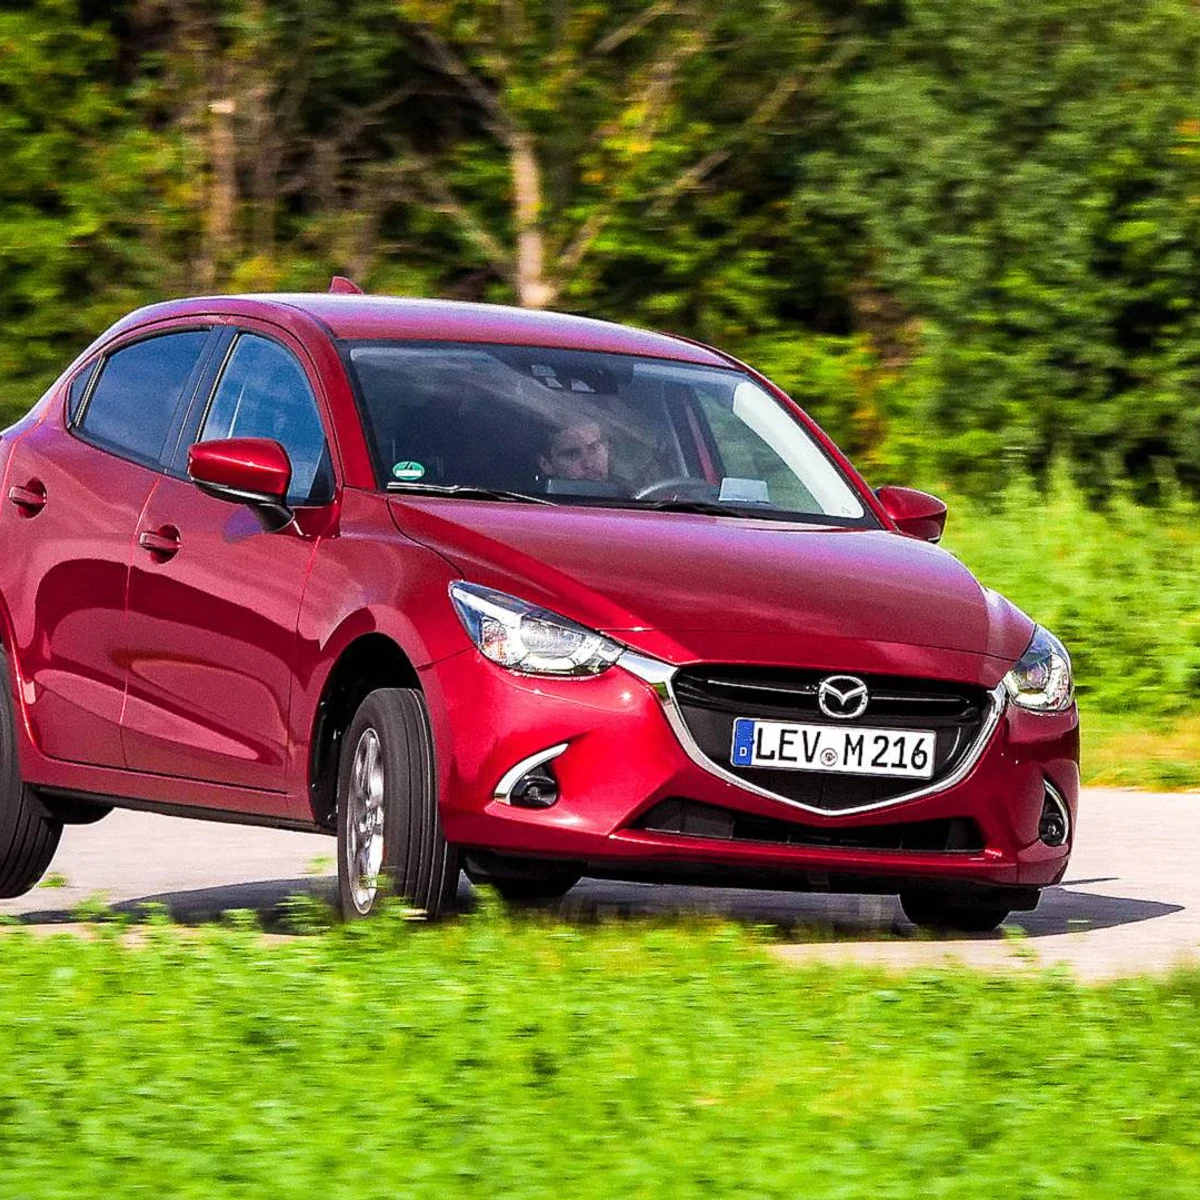 Prices for Mazda 2 Hybrid. How much does it cost?